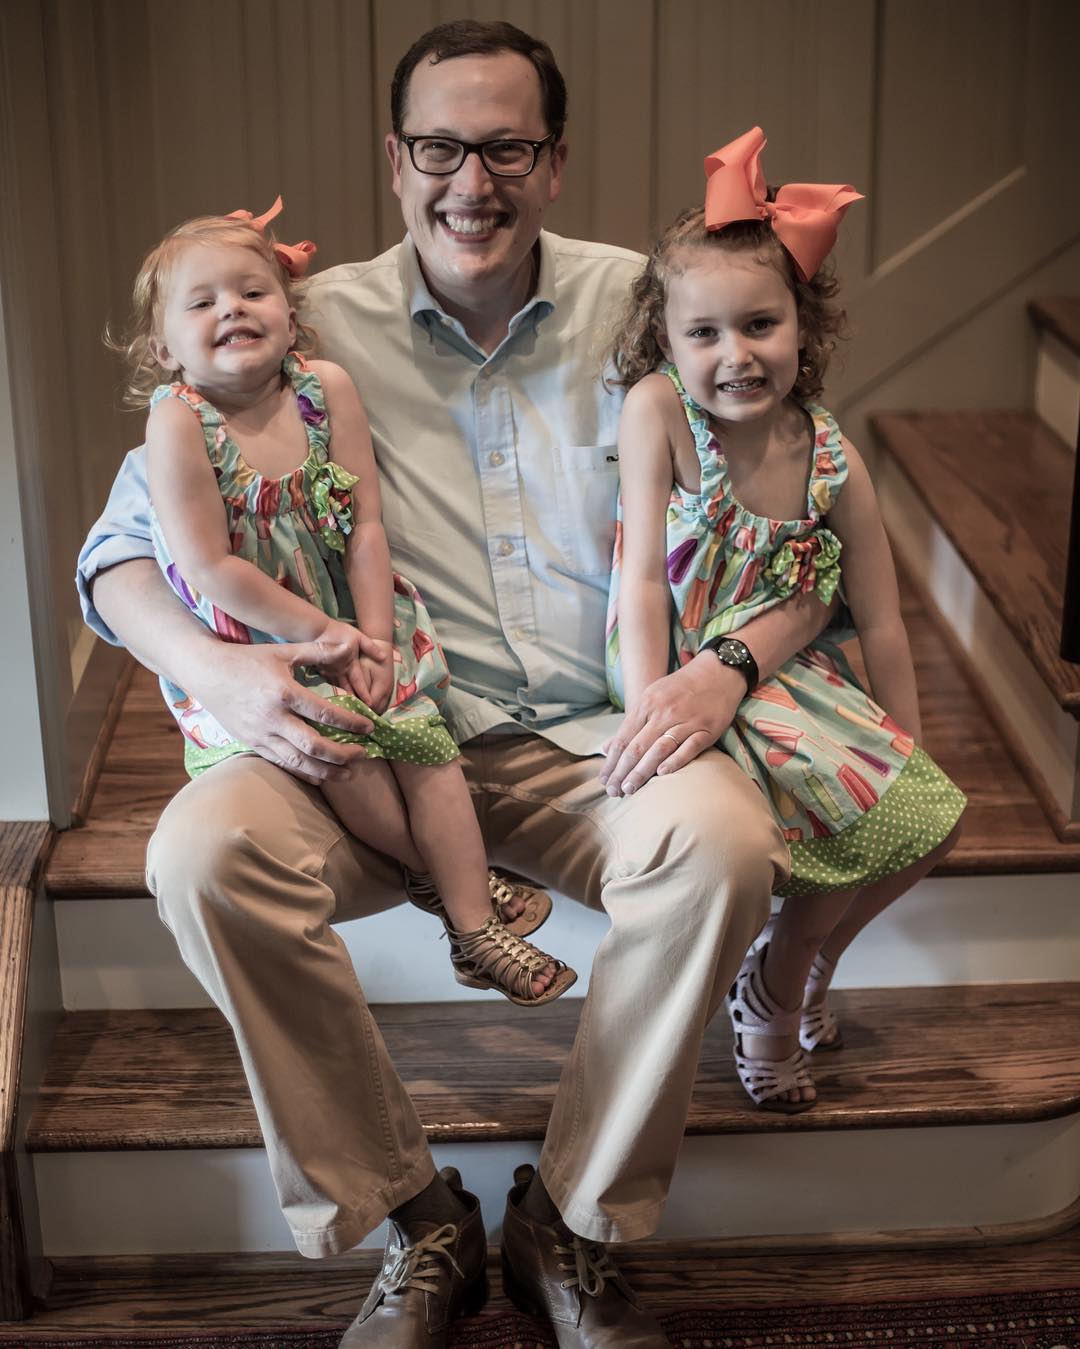 Have you ever wondered how two little girls can smile so much? Well...if you are Elsie and Pearl, you just might think your daddy is awesome! Bart Ellis is by day a financial planner, but year round a daddy to two beautiful girls. I had the pleasure spending time with them, learning what it means to be a Good Man and a Good Daddy! #ManUPstate #Canon #5dmarkiii #BringIt